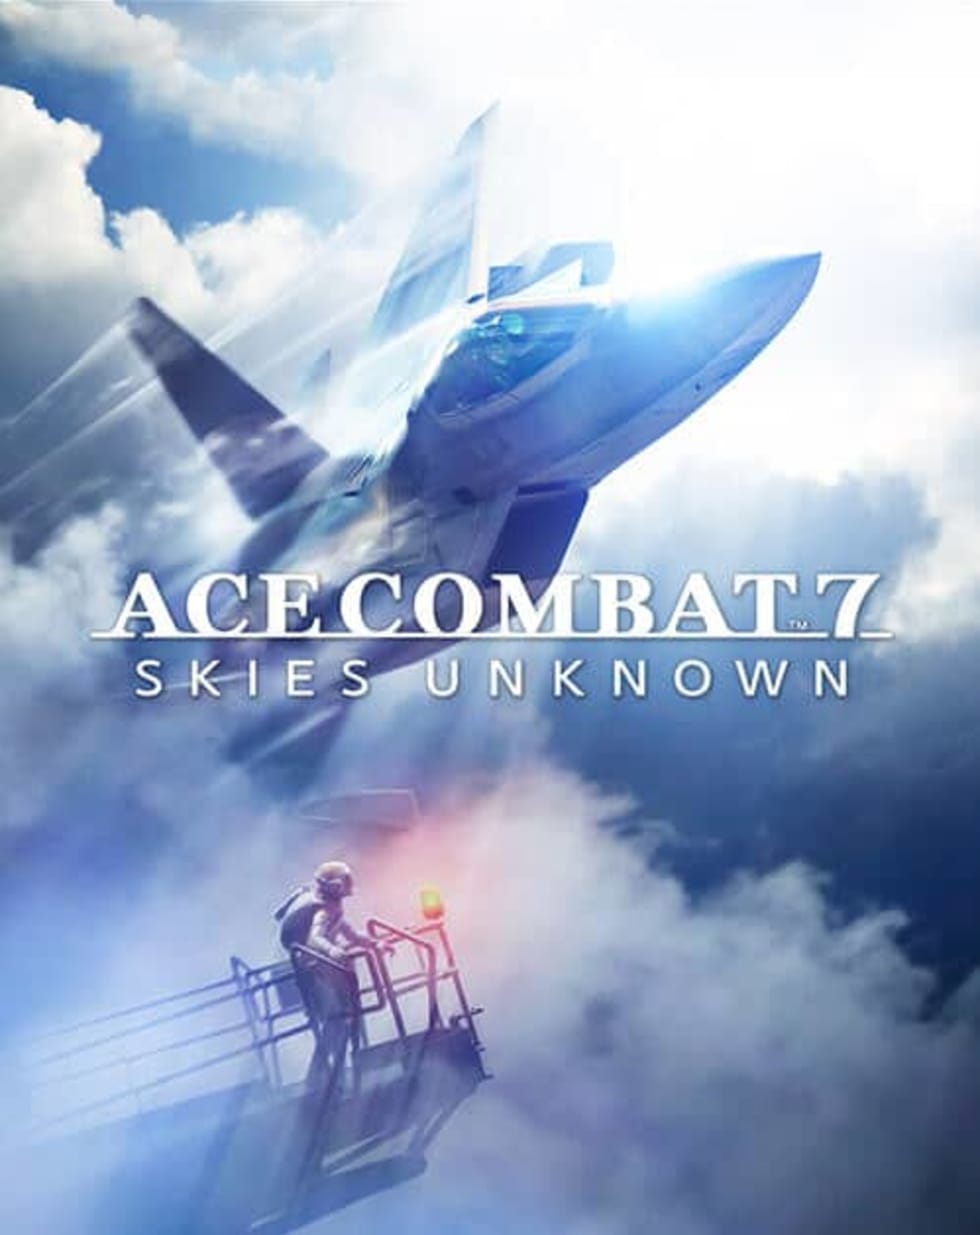 Ace Combat 7 video game